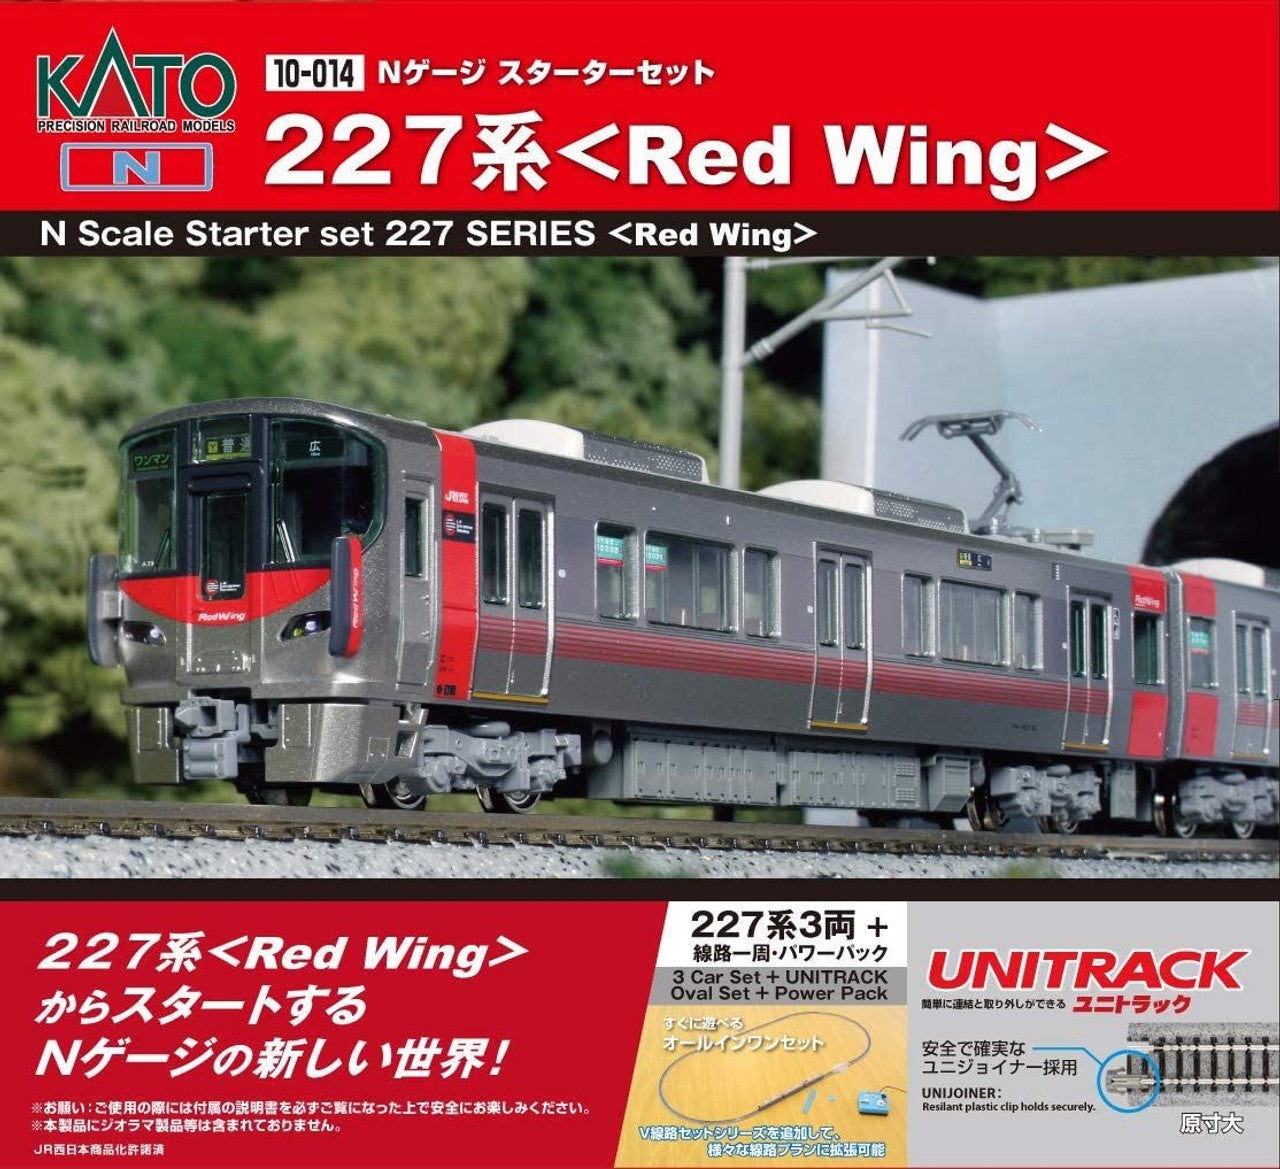 Kato 10-014 Series 227 'Red Wing' Starter Set (3 Cars + M1) (N scale)